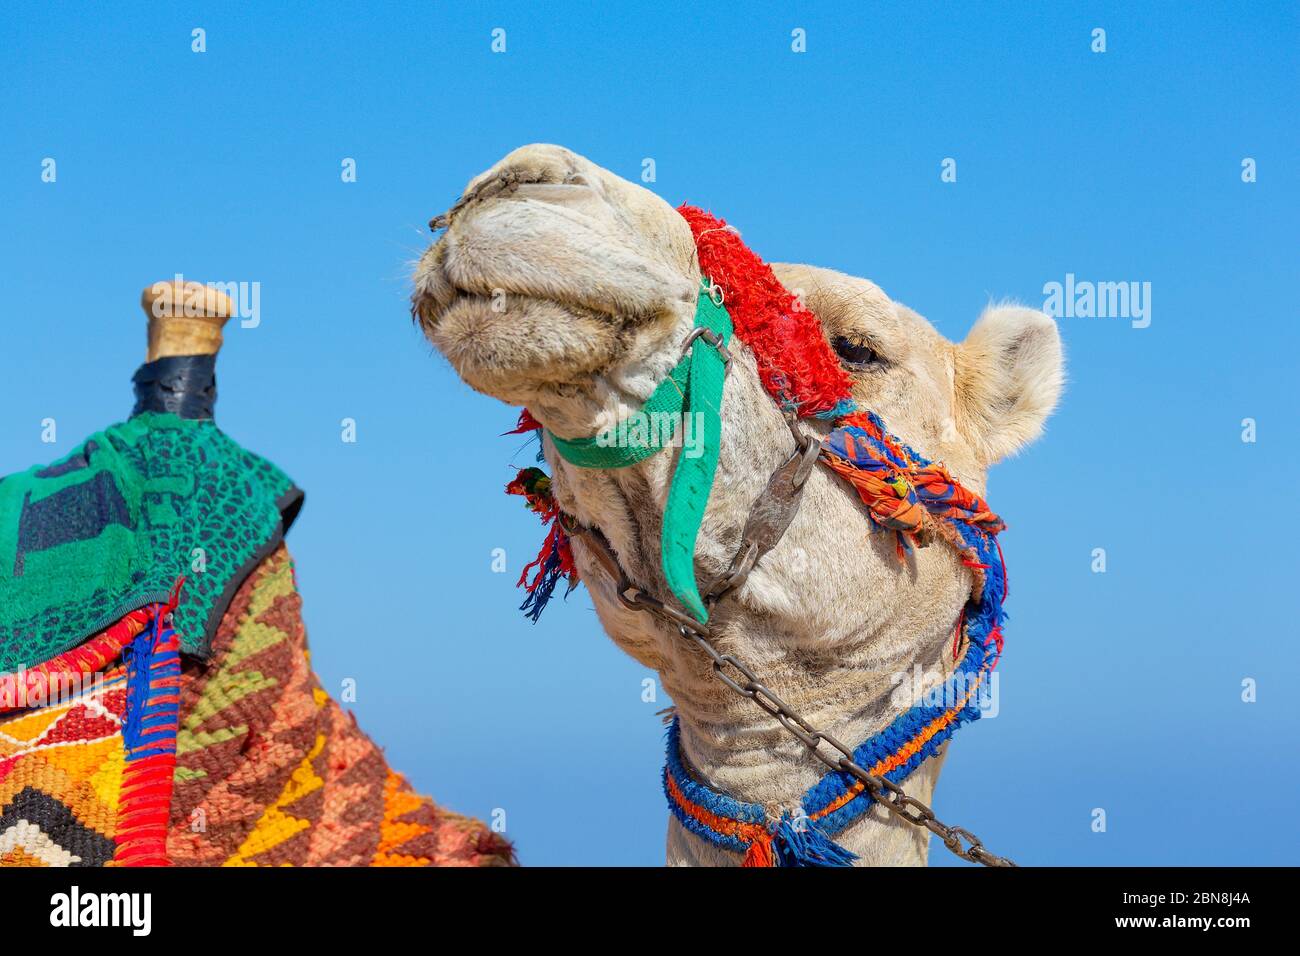 Portrait camel head  with colorful head collar against blue sky Stock Photo